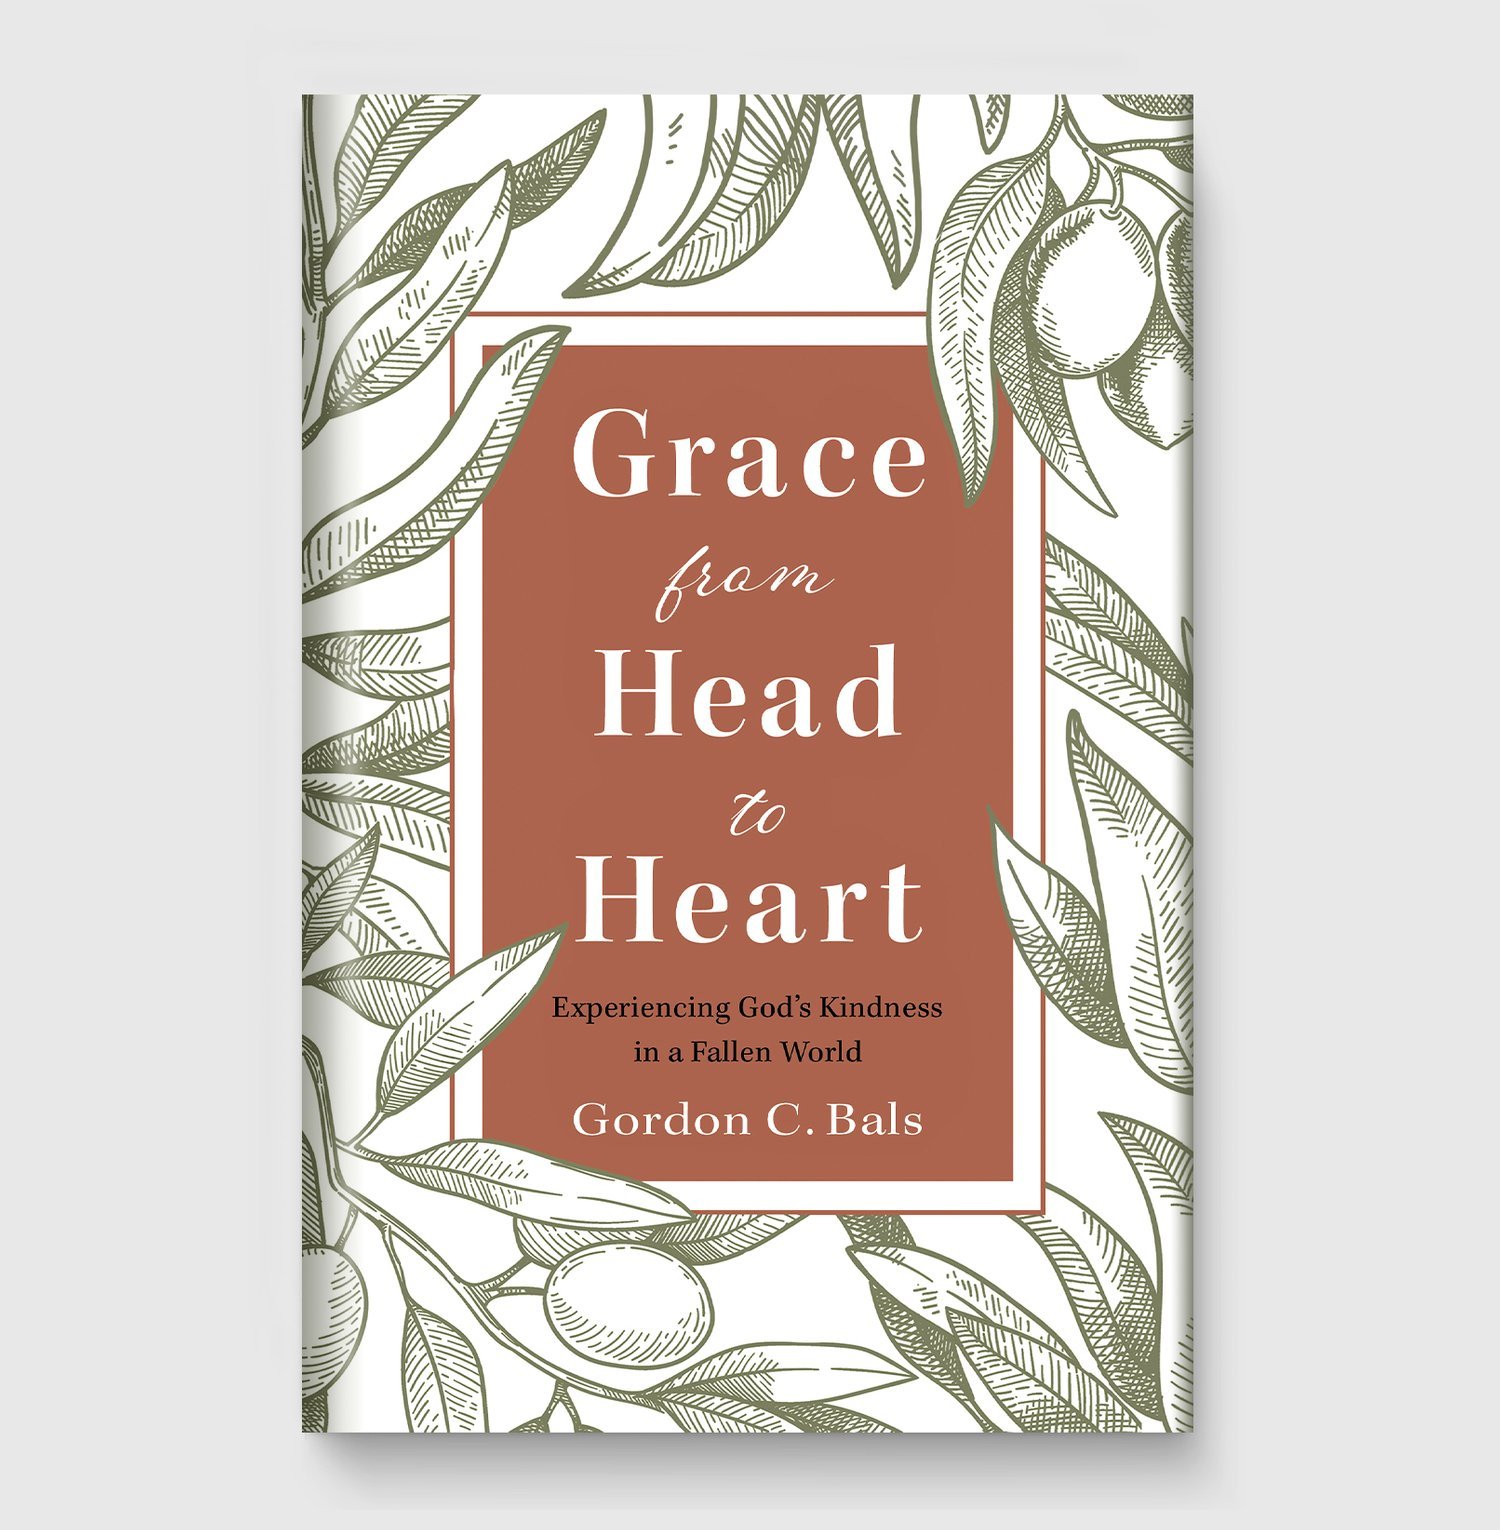 Grace from Head to Heart